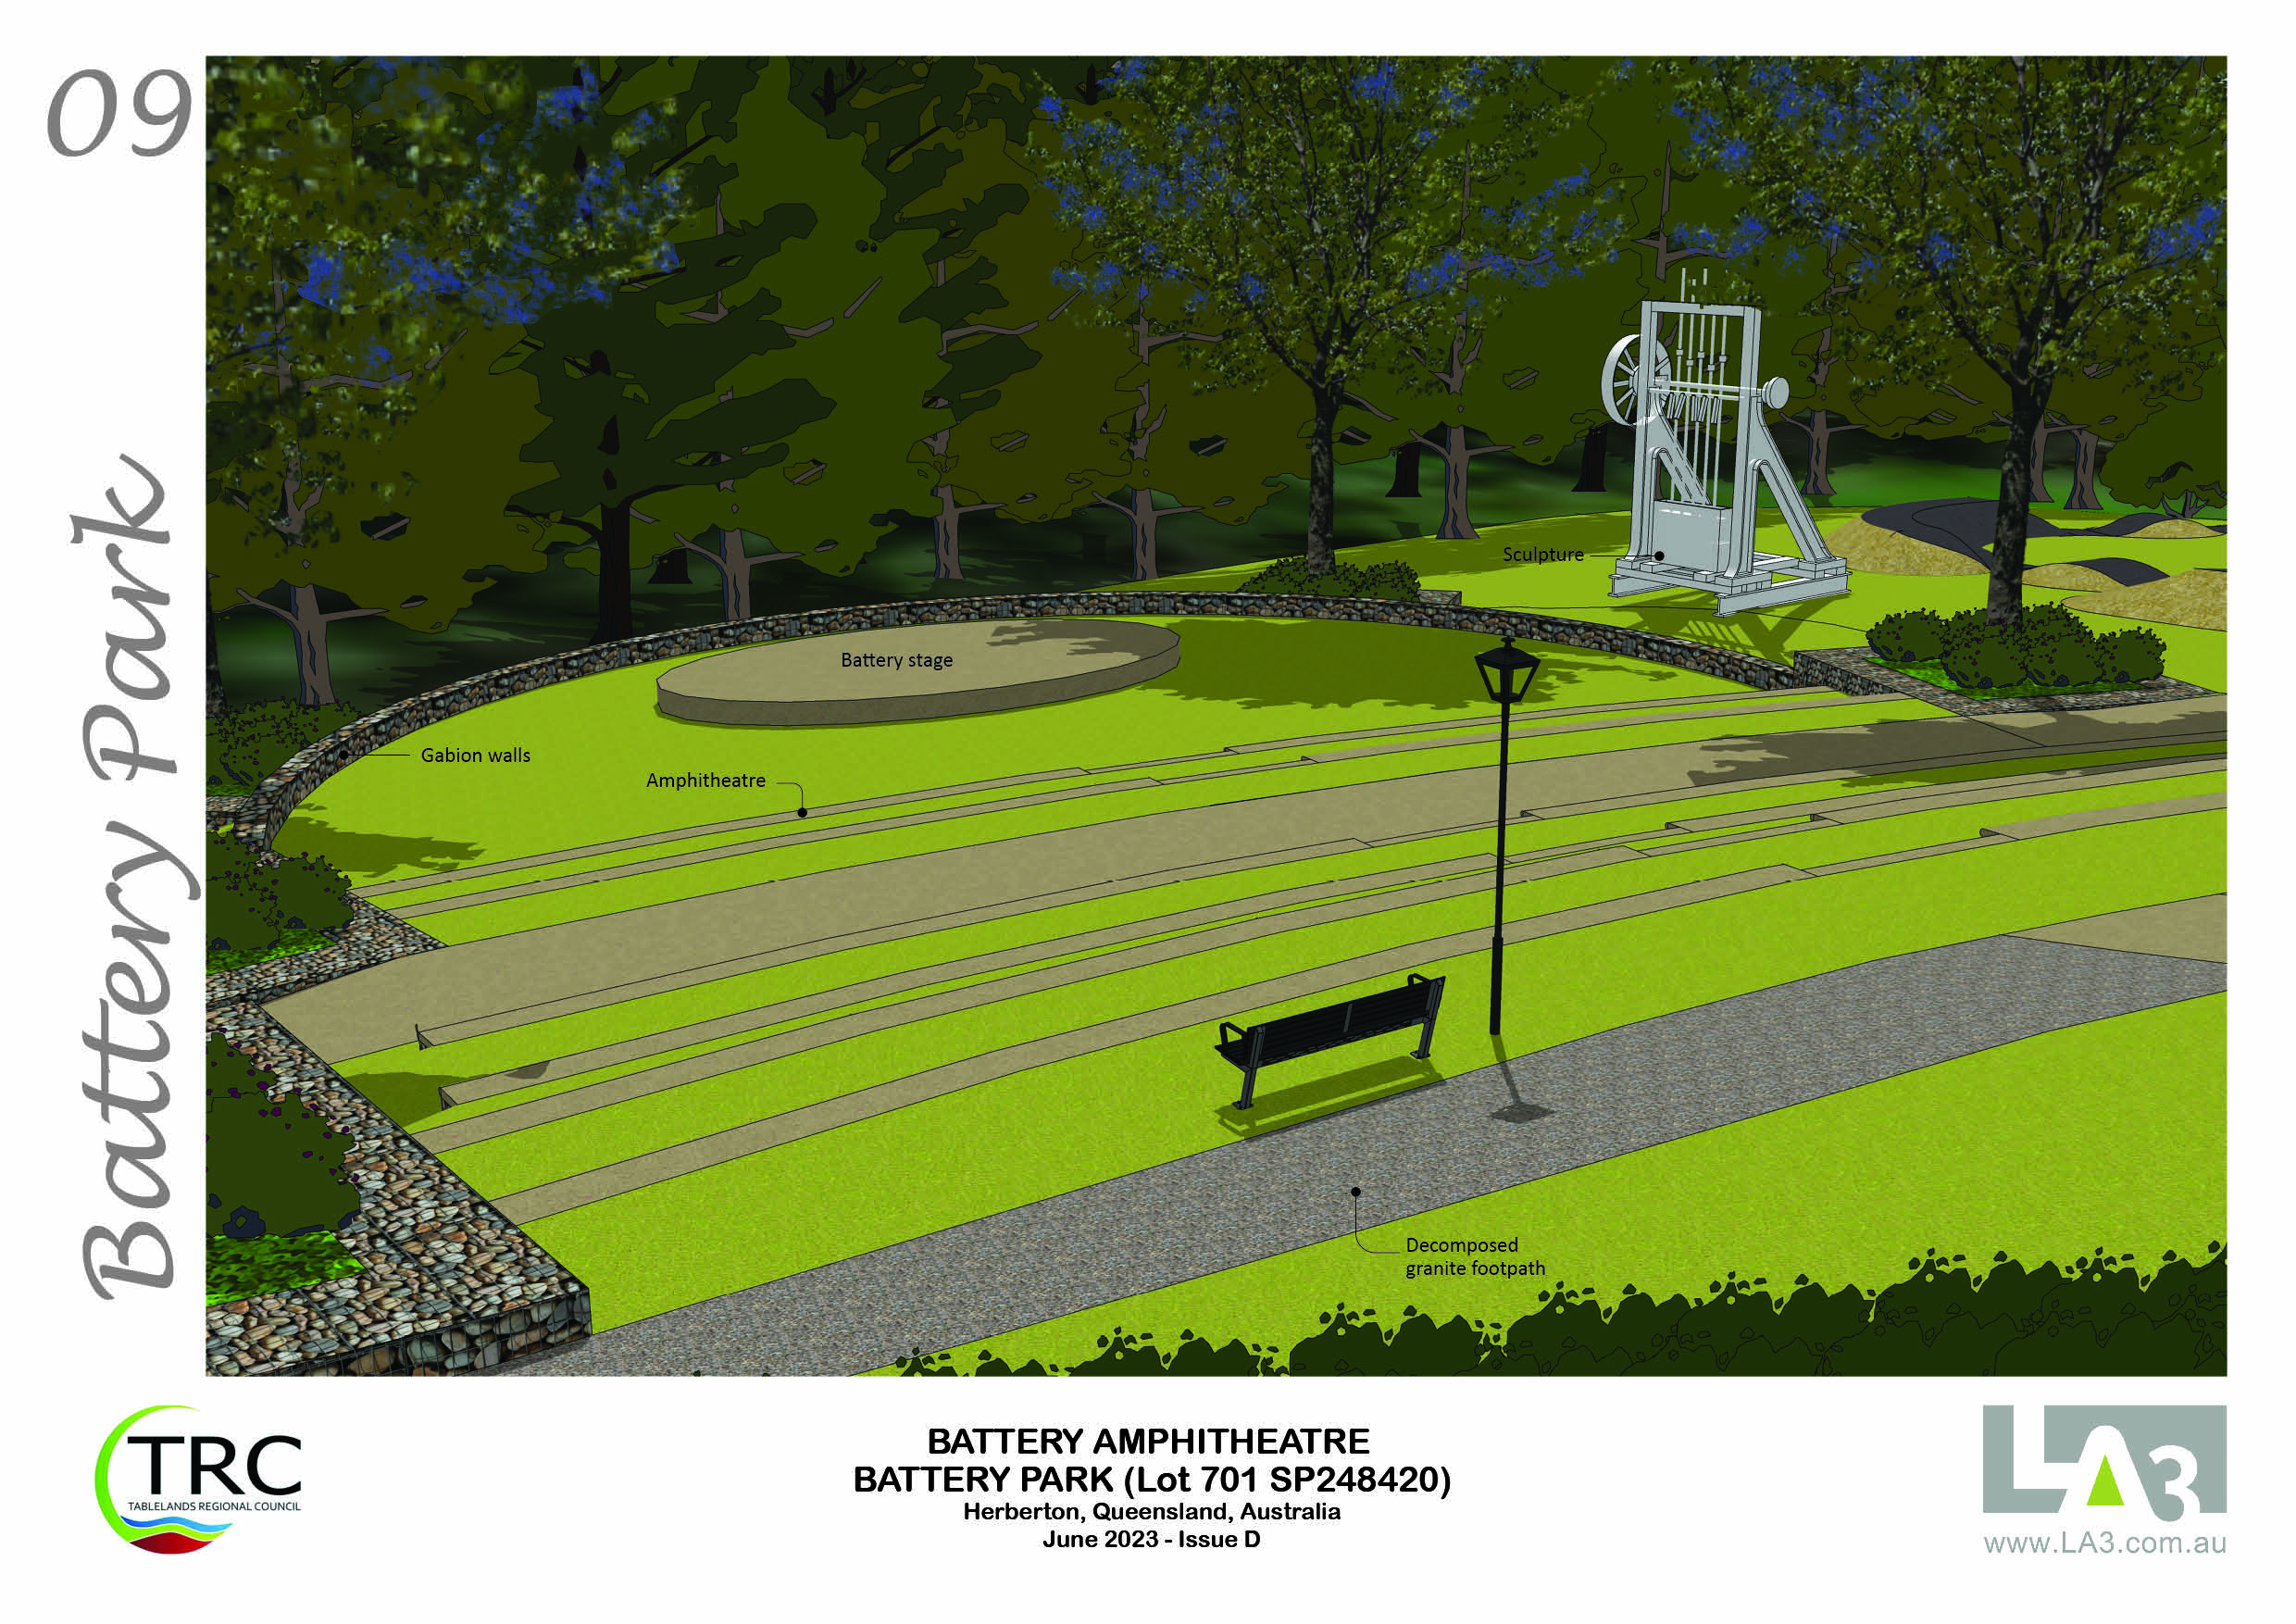 An artist impression of a stage and sculpture at Herberton Battery Park